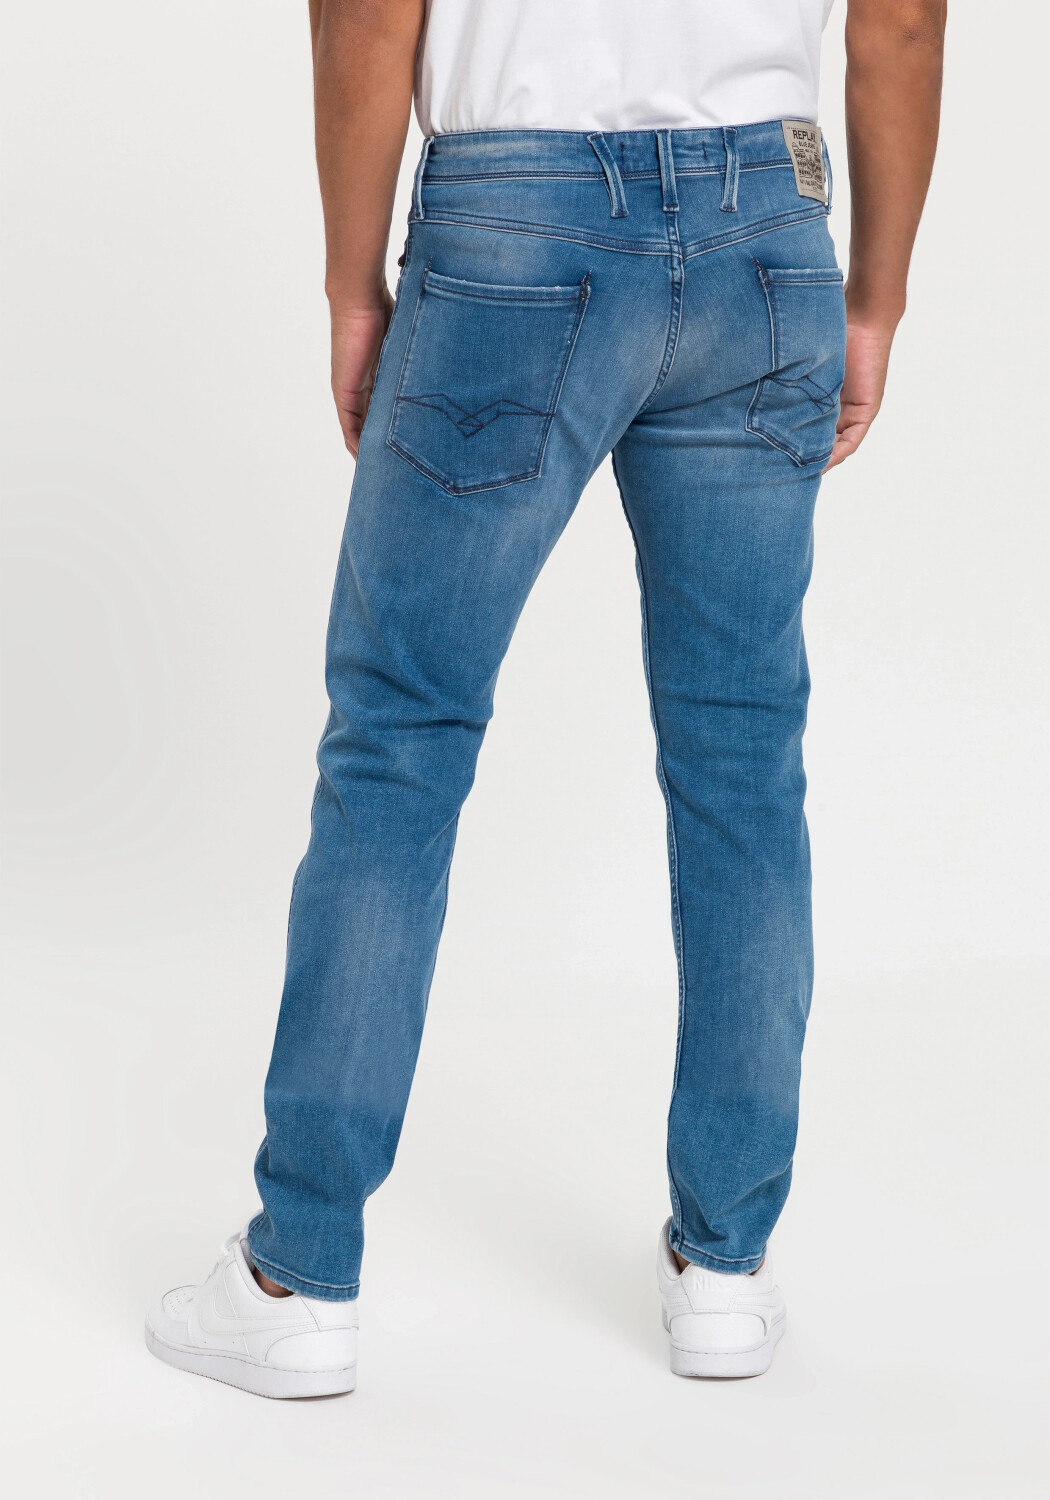 Buy Replay Anbass Hyperflex Jeans light (BF5) from Best Slim (Today) on Fit – £48.27 blue Deals